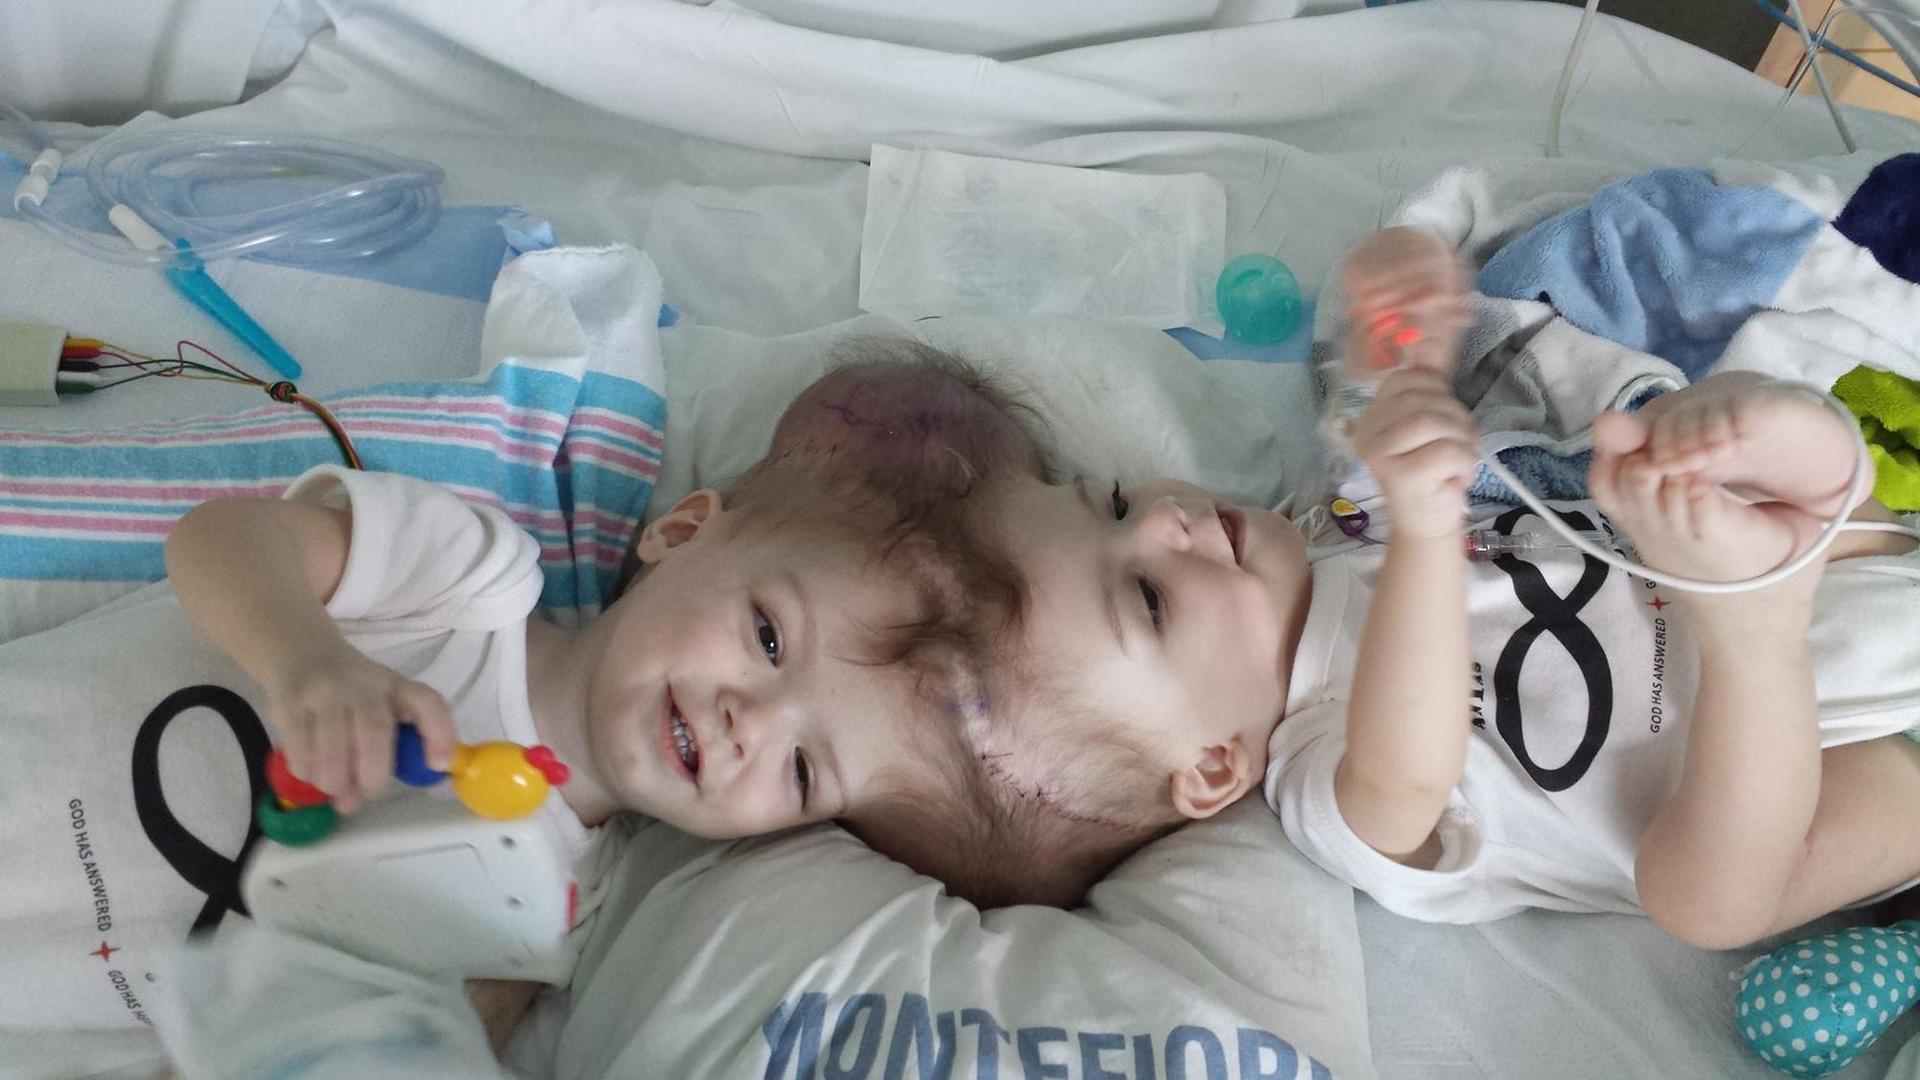 Twins Born With Conjoined Heads Finally Got Separated After 27 Hours Of Operation